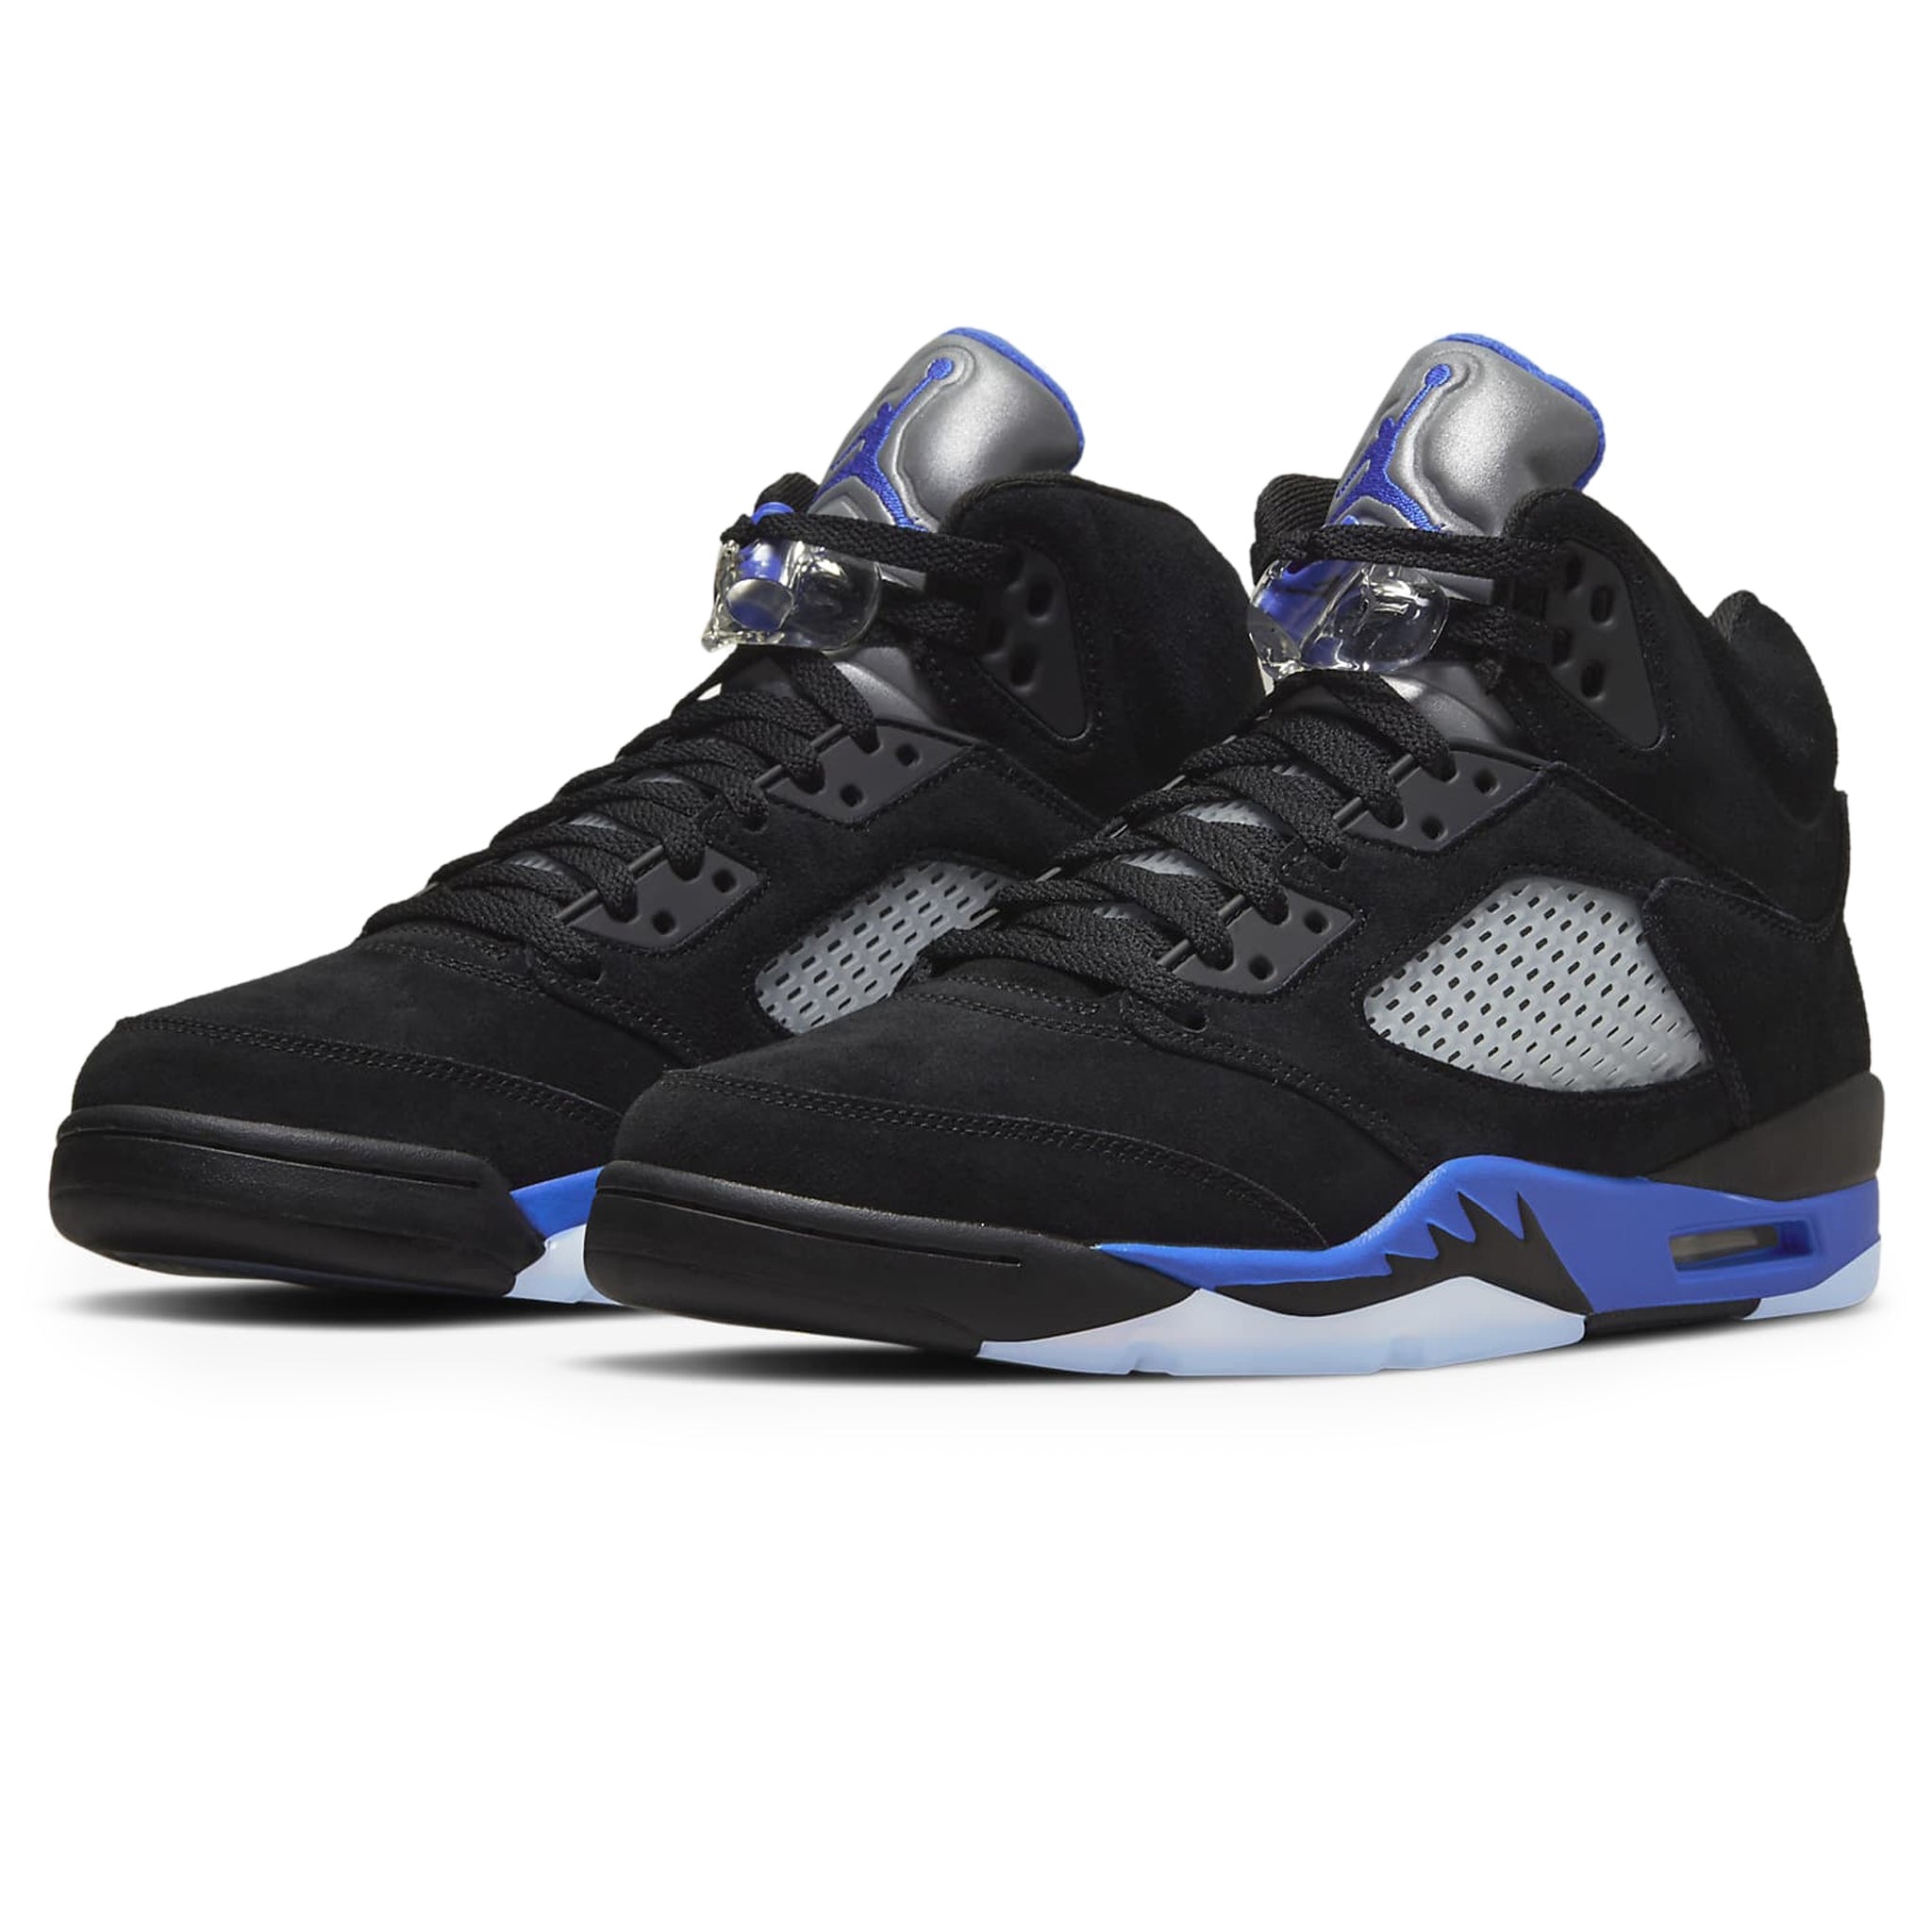 Front side view of Air Jordan 5 Retro Racer Blue CT4838-004